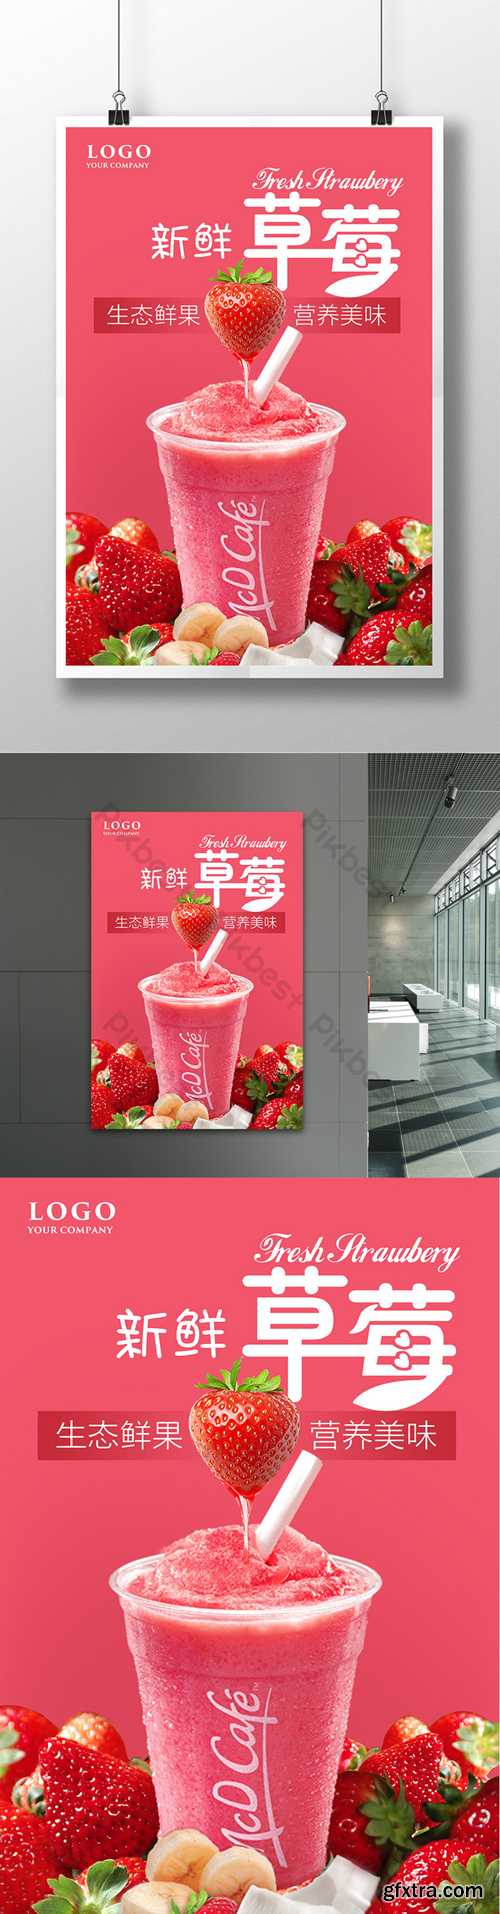 Freshly squeezed strawberry juice drink poster Template PSD